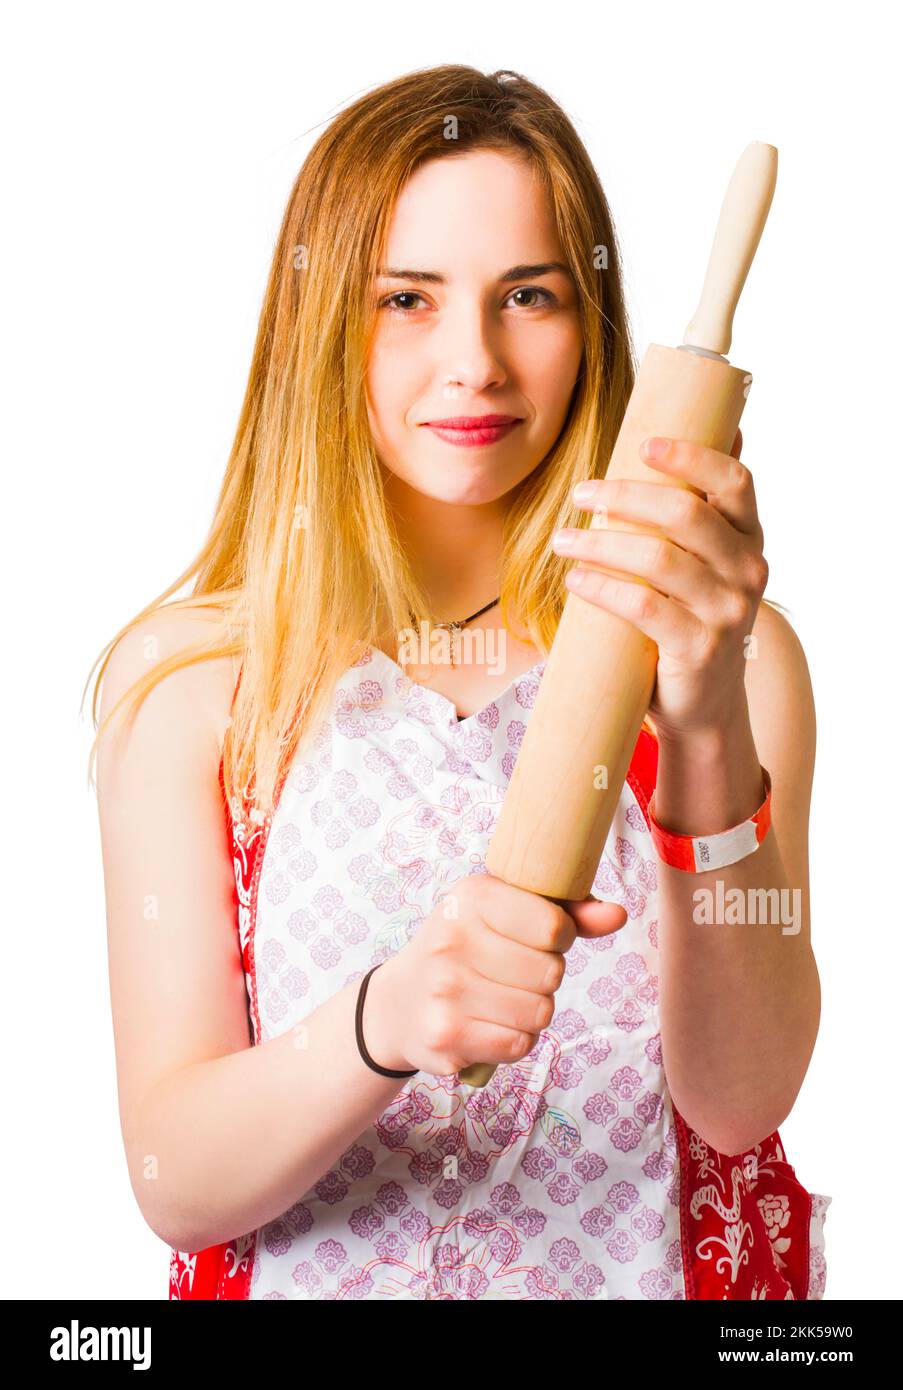 Young woman in apron holding wooden rolling-pin and looking at camera Stock Photo